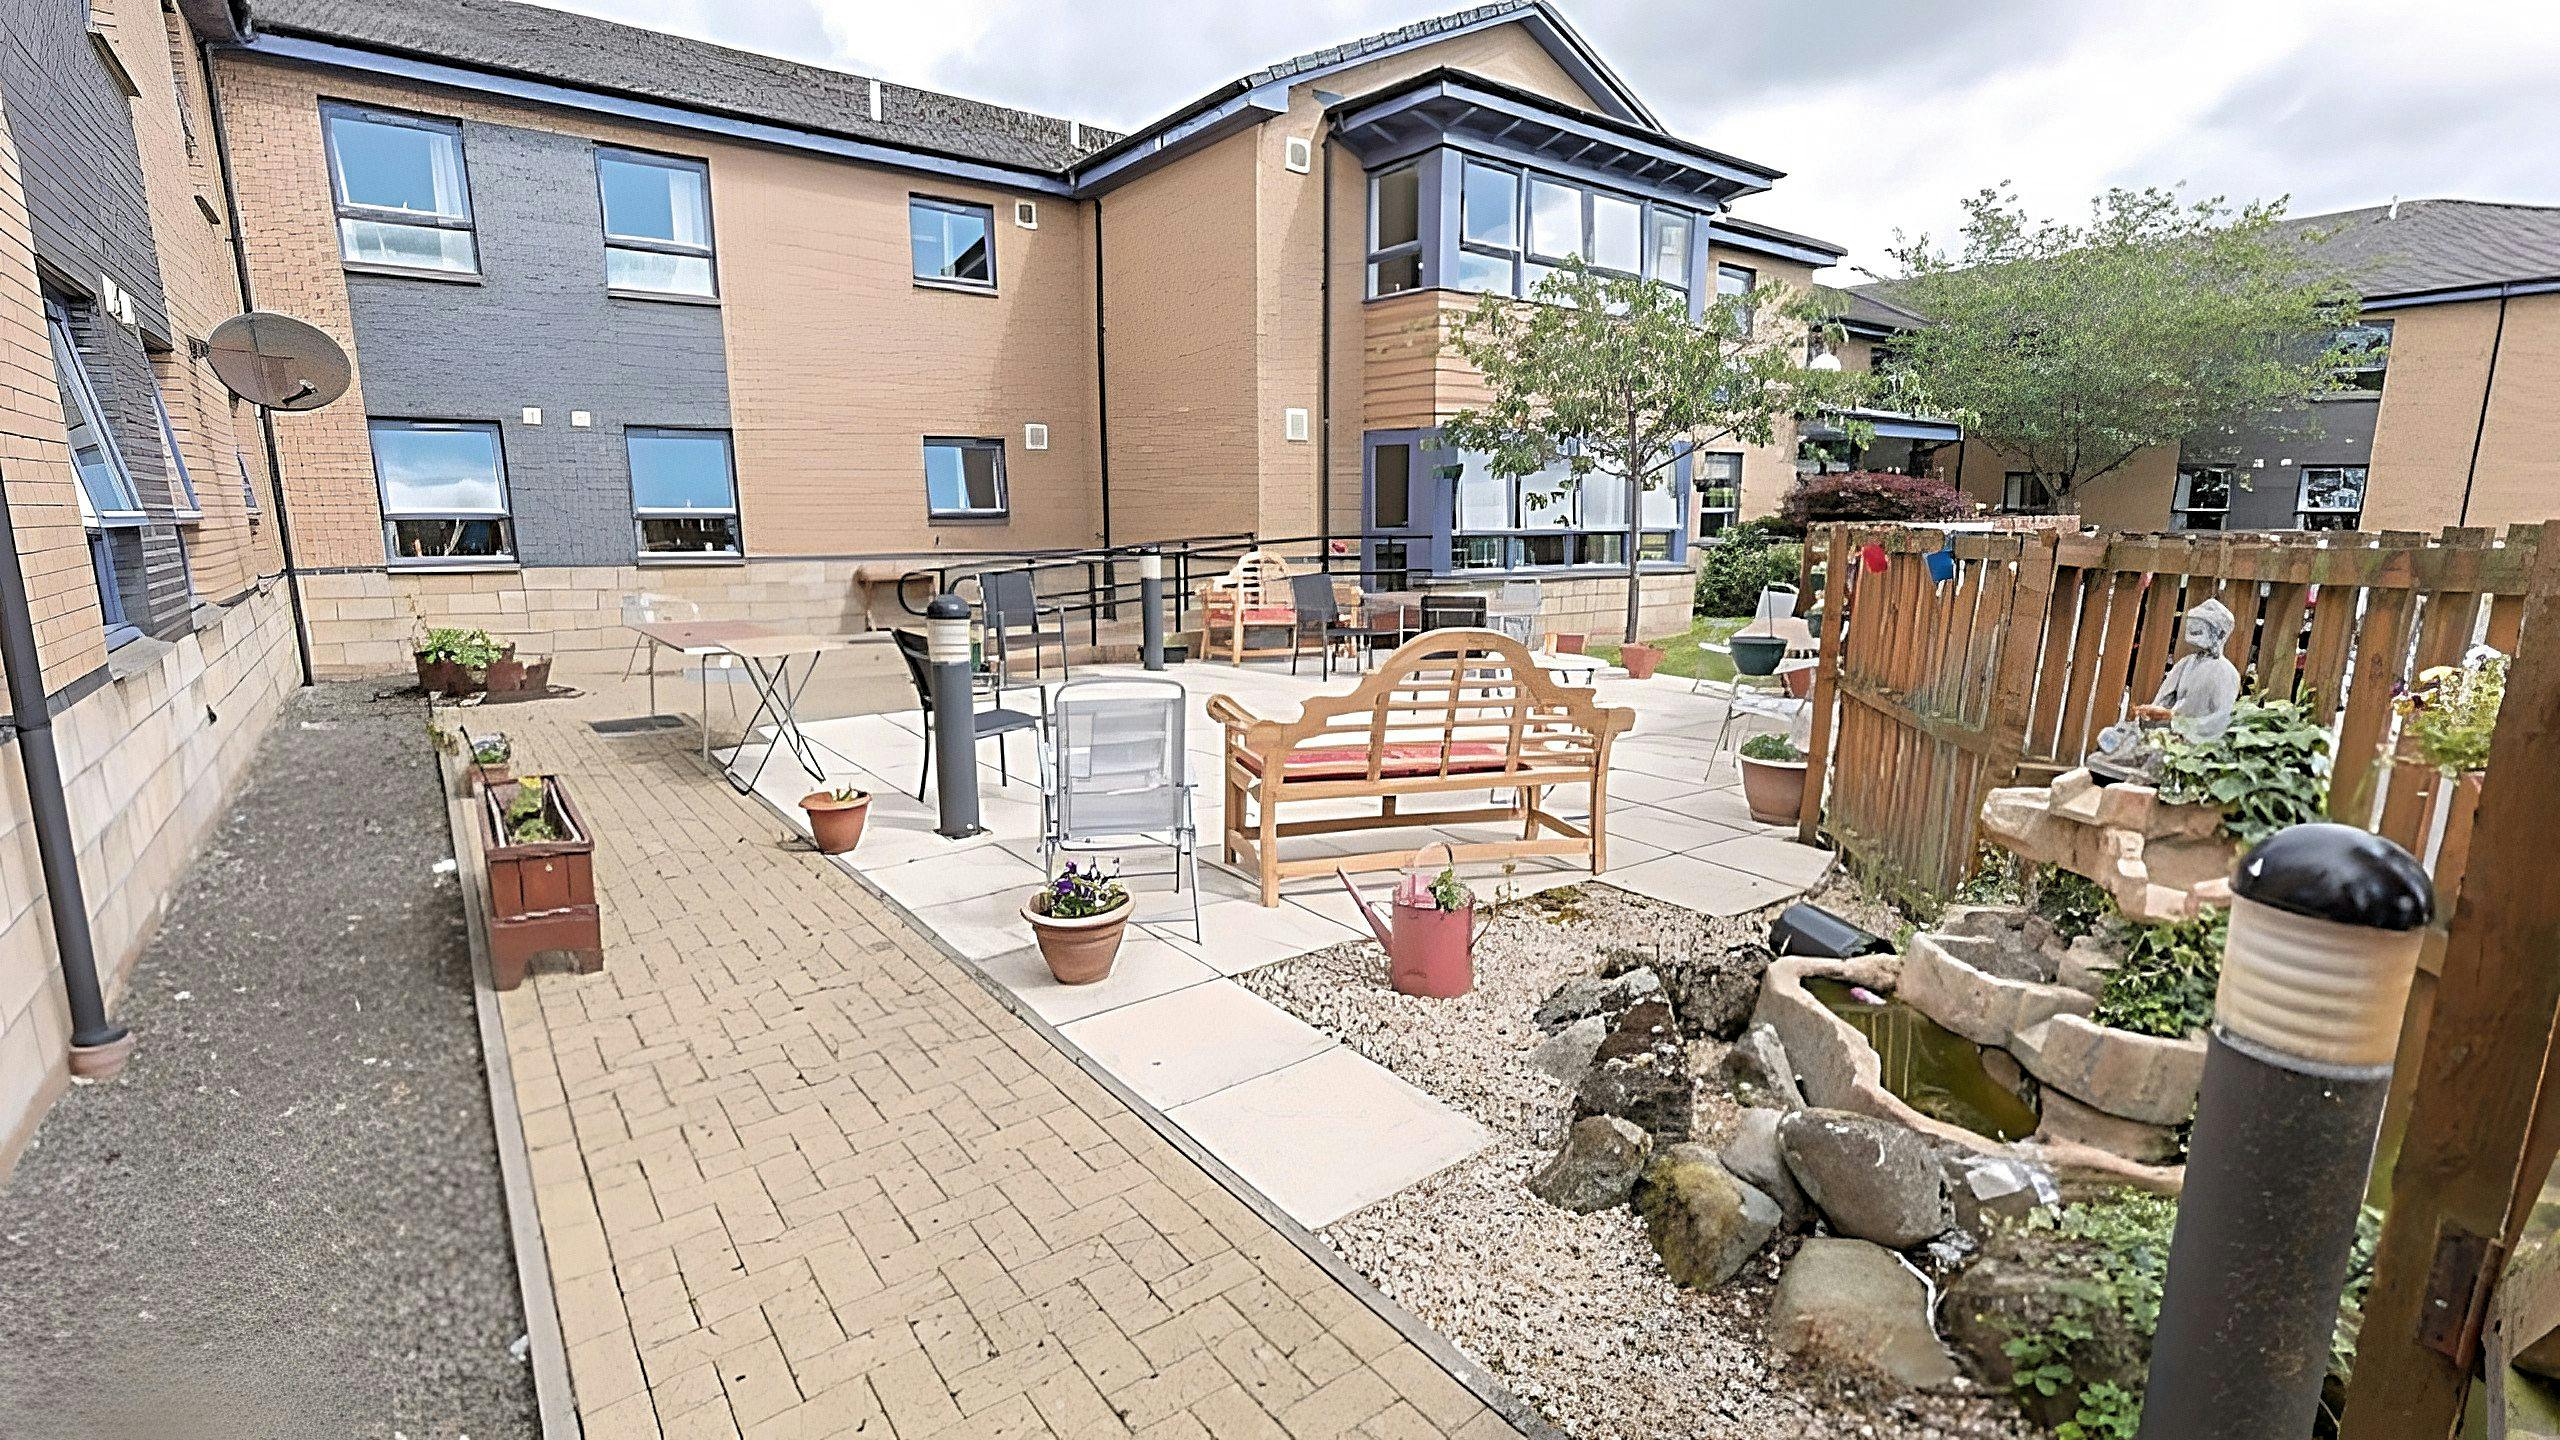 Countrywide - Wallace View care home 6